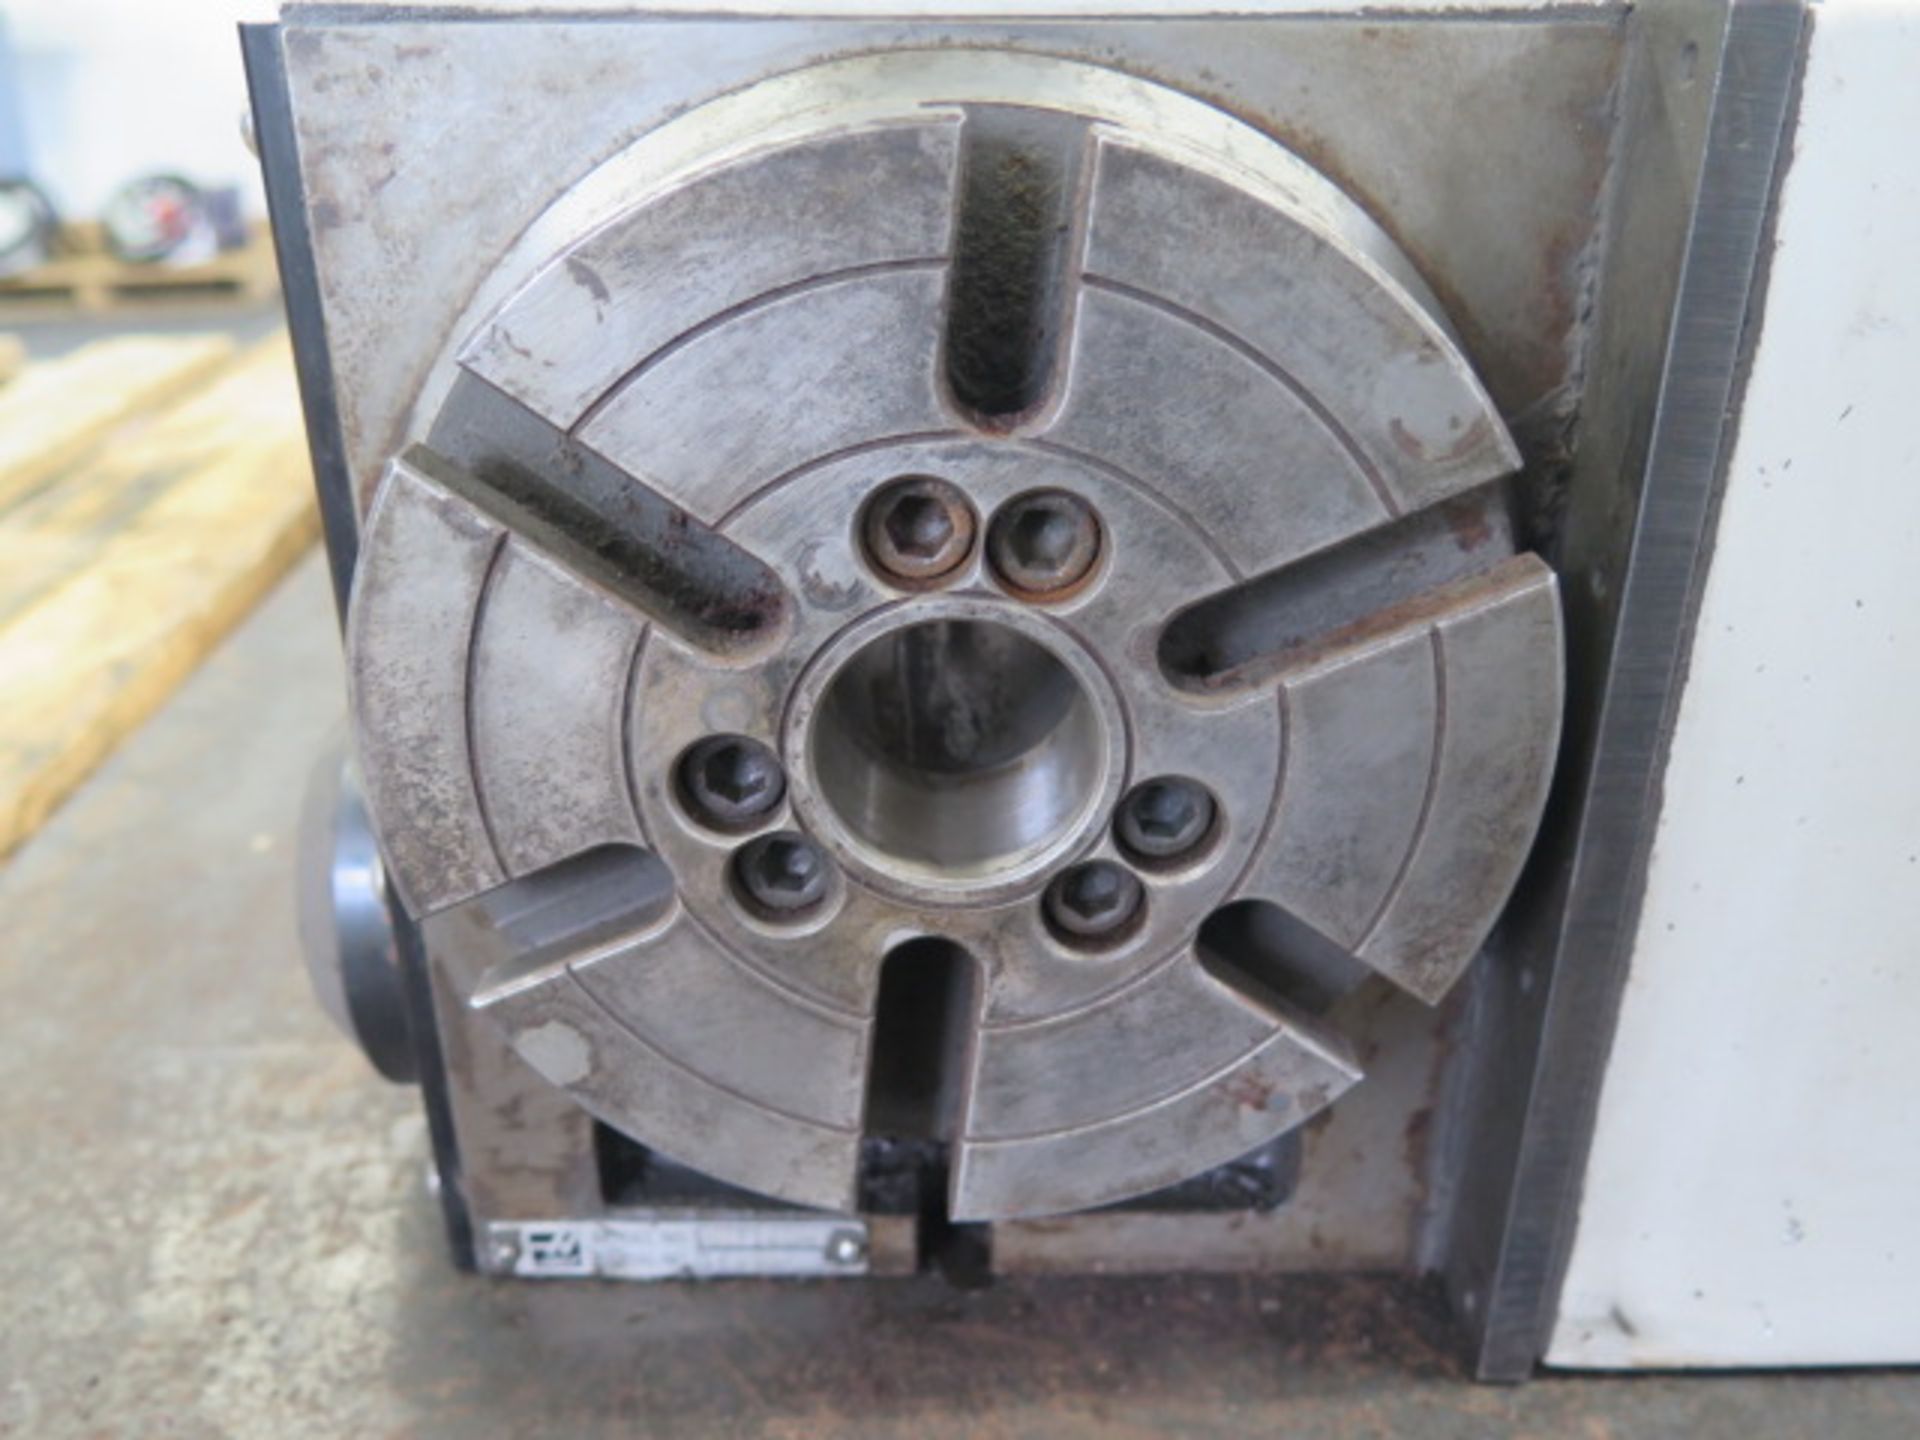 Haas HRT160H 6” 4th Axis Rotary Indexer s/n 163567 (Change Parameter #45 VALUE from “0” to “16384”) - Image 6 of 9